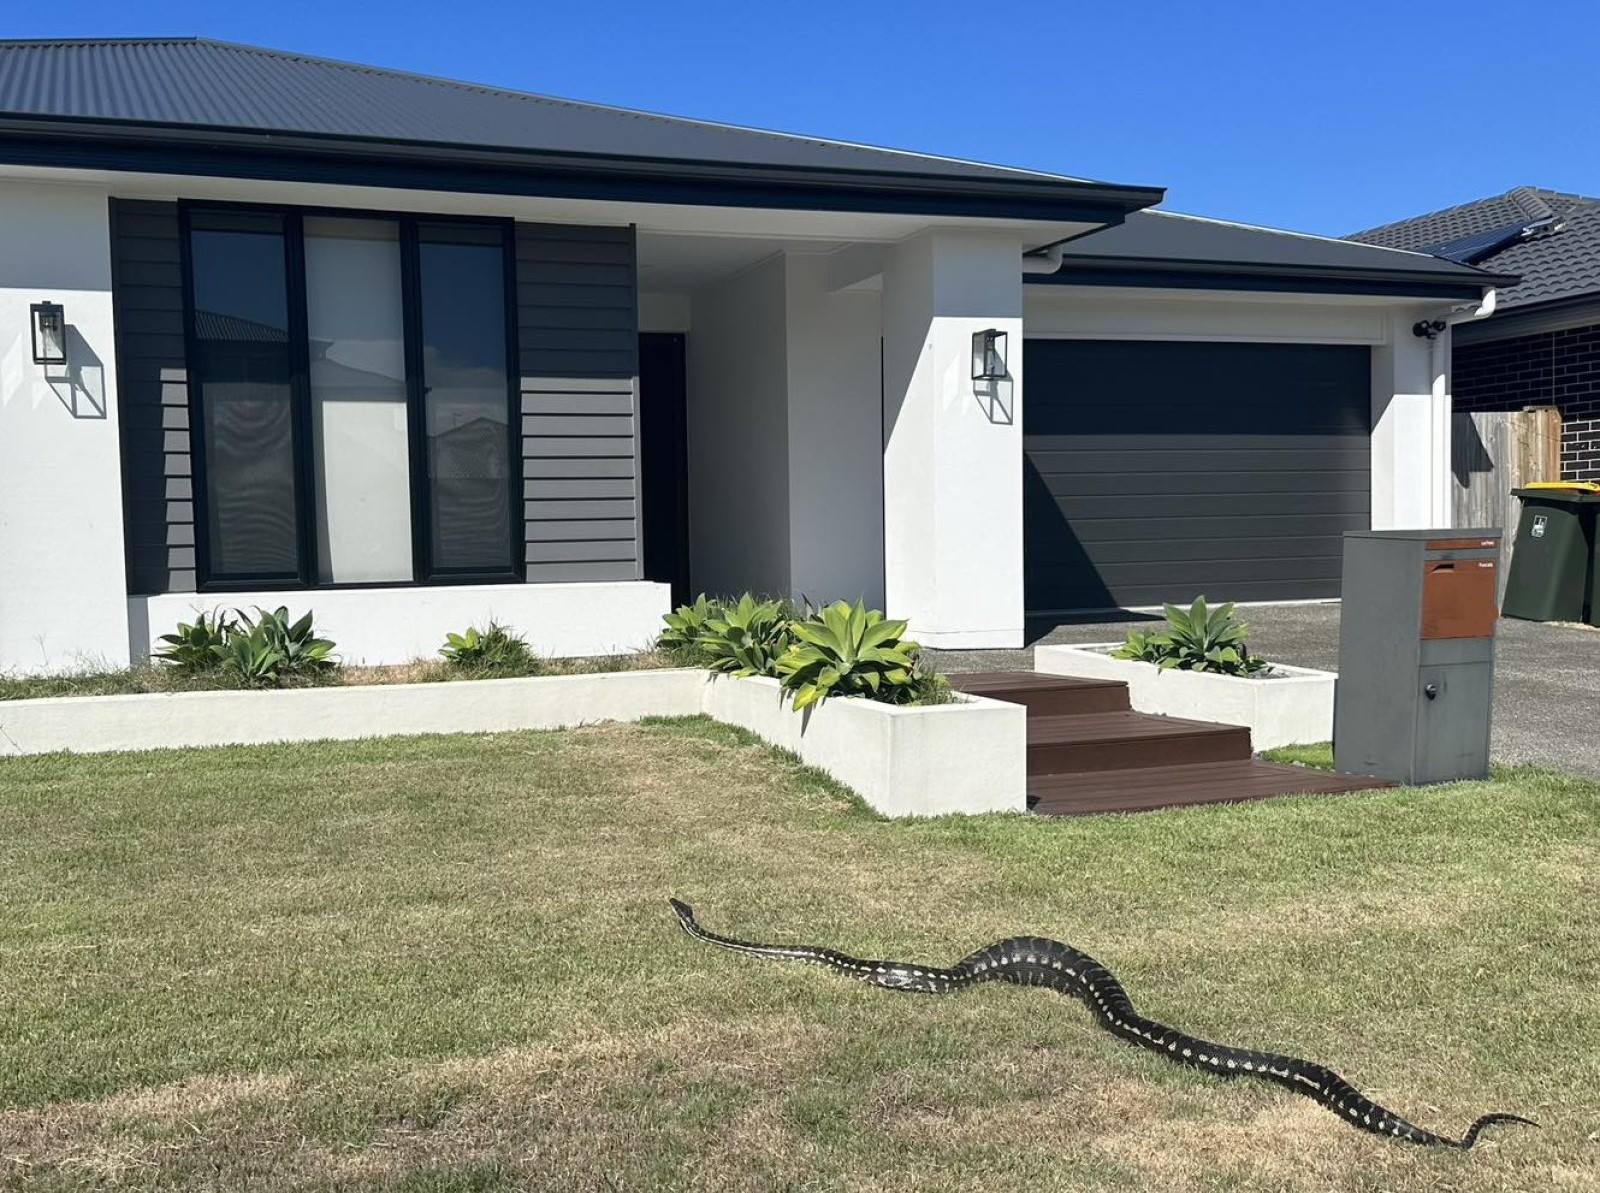 How To Find A Snake In Your Backyard